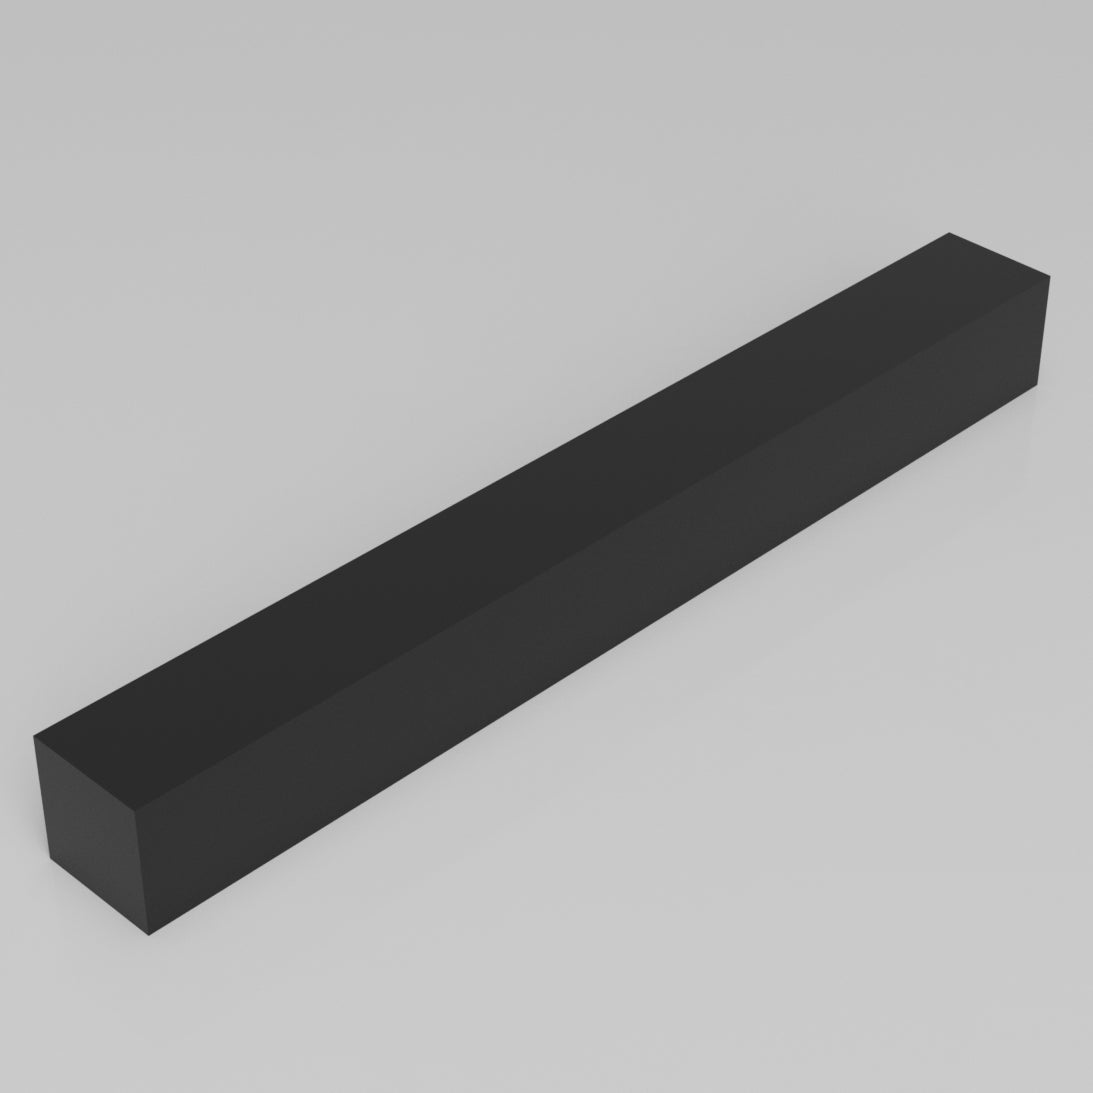 Machinable Wax Rectangular Block Front View 2 Inch by 2 Inch by 18 Inch